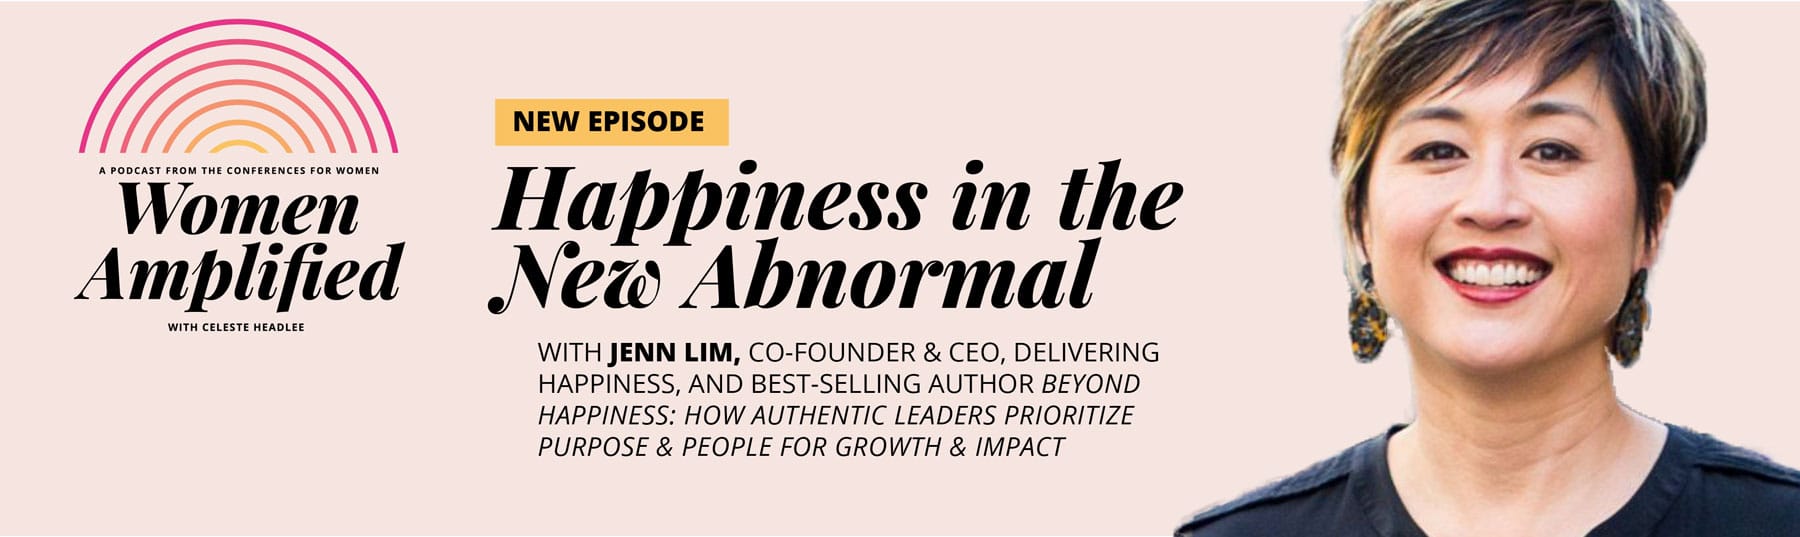 Pursuing Happiness in the New Abnormal — with Jenn Lim of Delivering Happiness